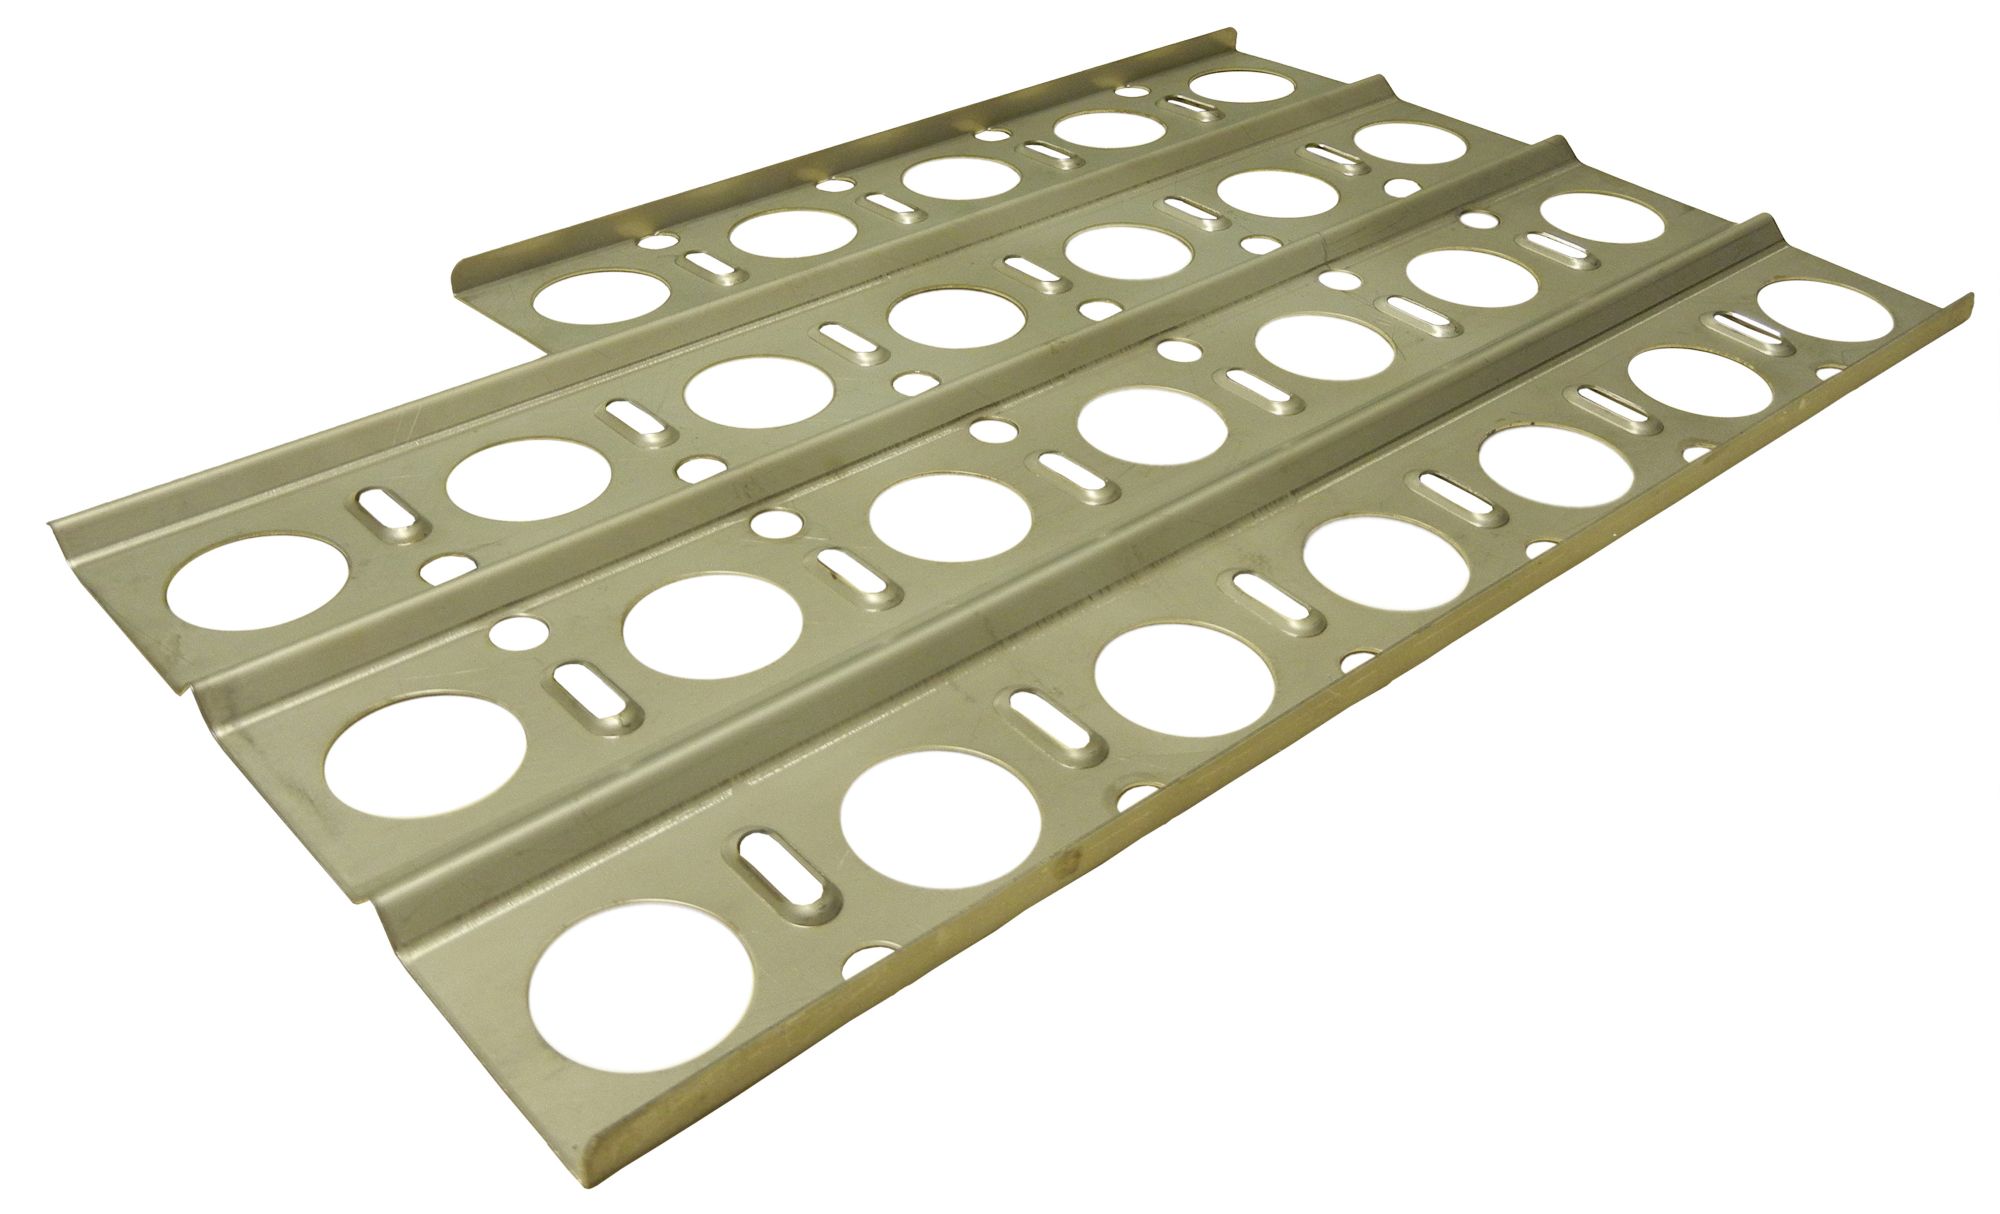 Stainless steel heat plate for Dynasty, Jenn-Air brand gas grills